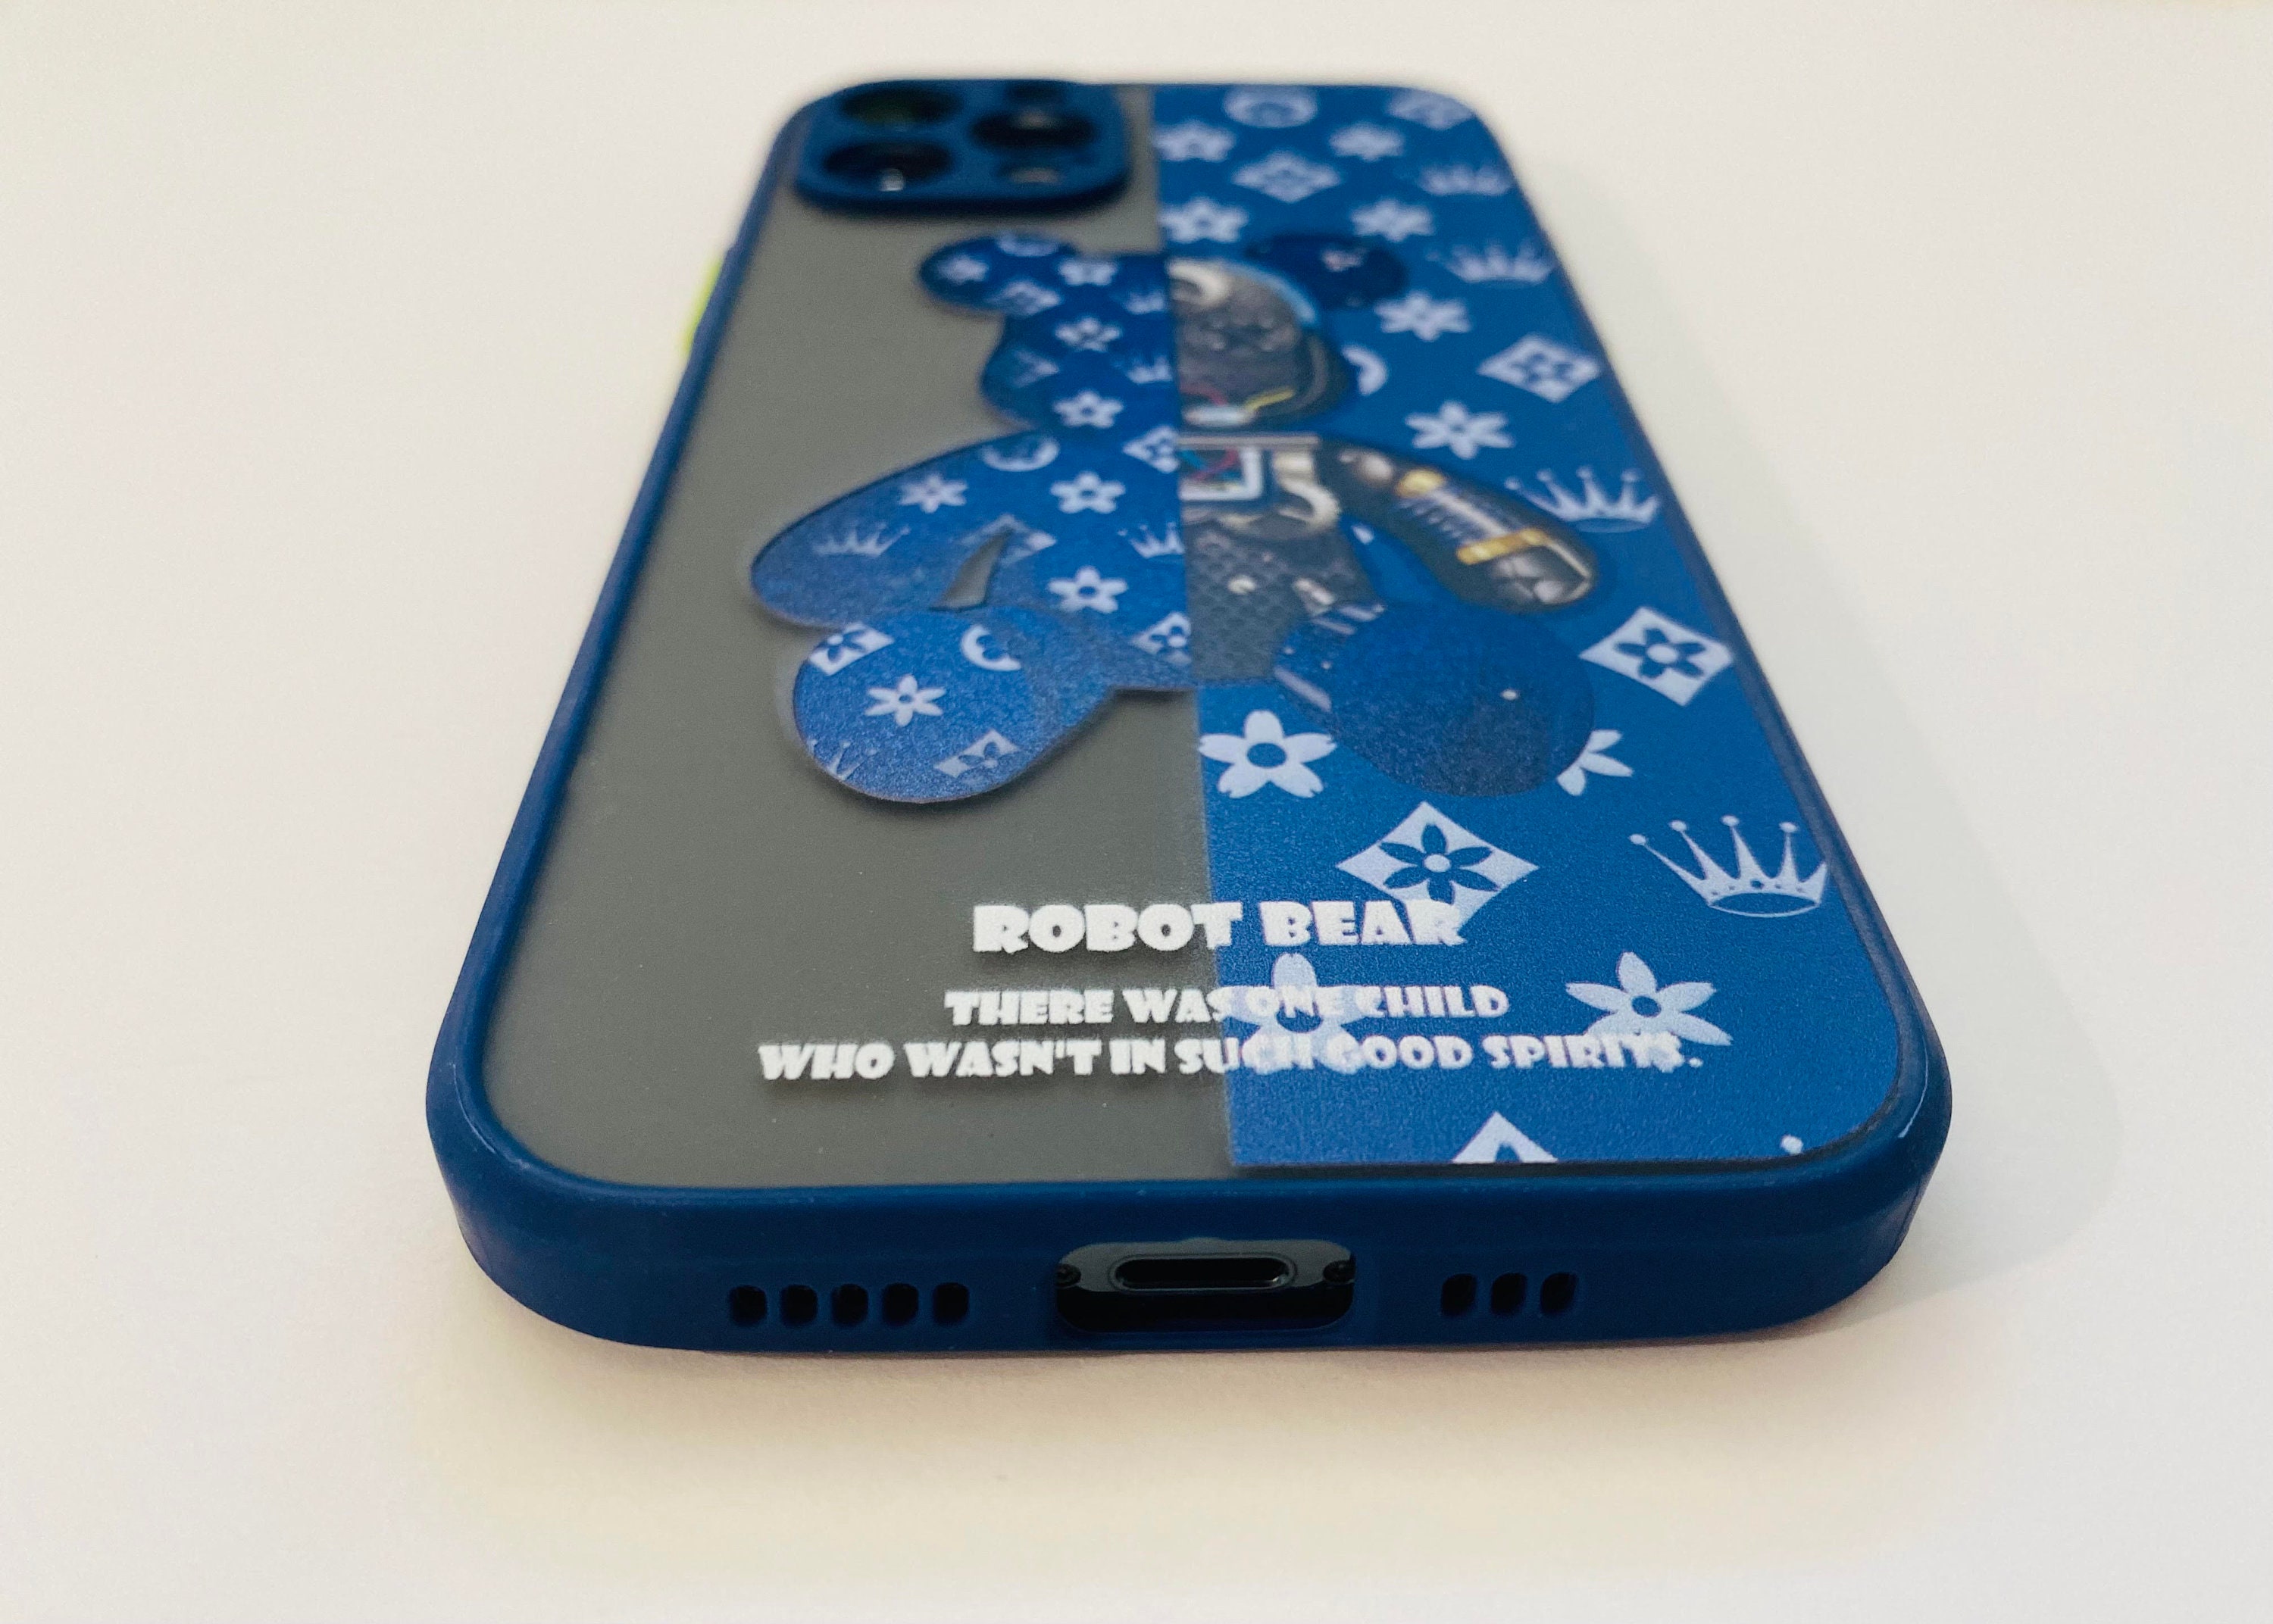 Lamb Gamer Cult-iphone snap phone case-Snouleaf by TeeFury